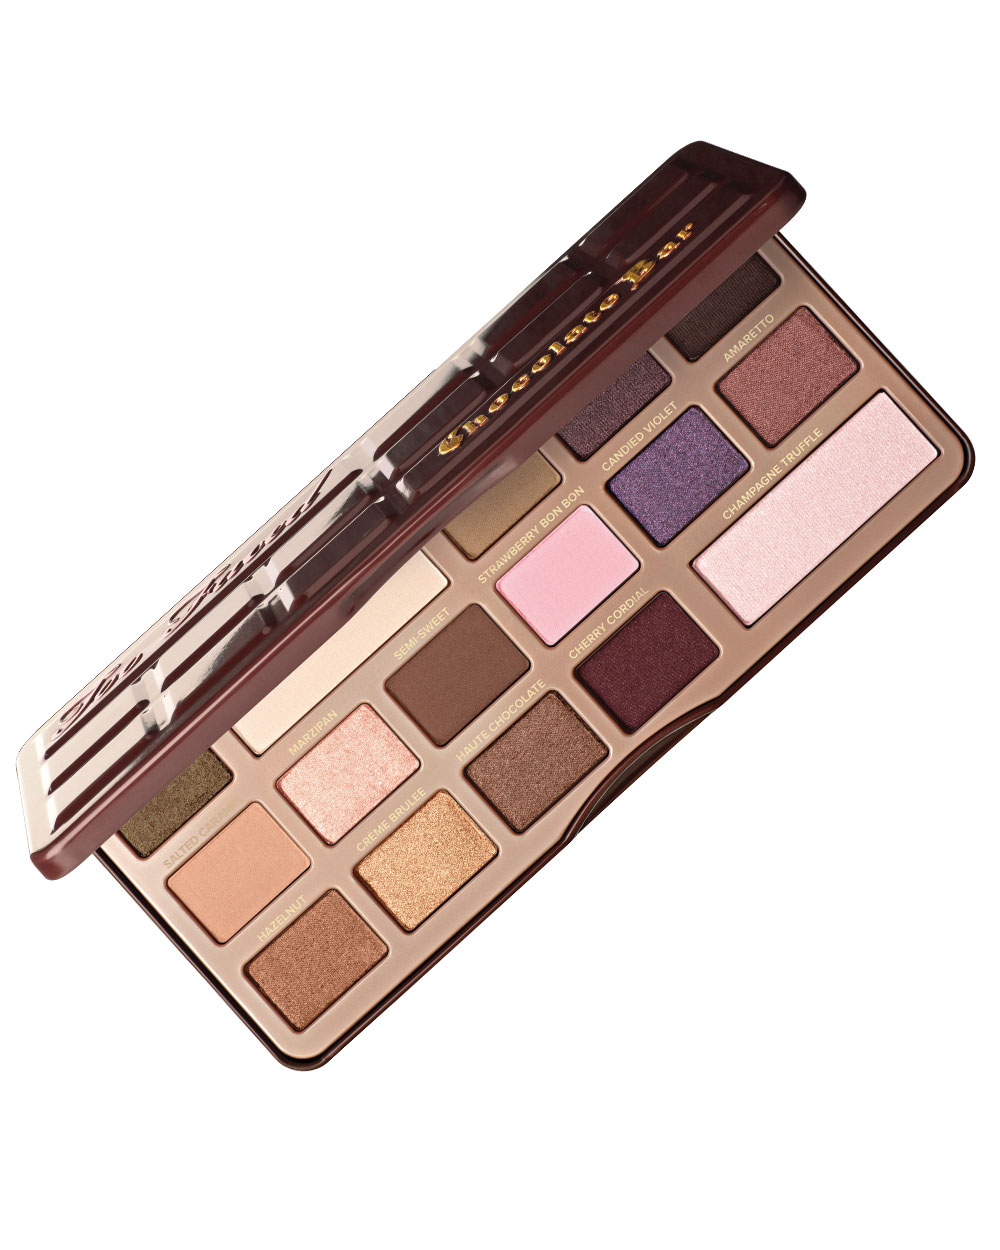 Throwin’ shade Too Faced Chocolate Bar Eye Shadow Palette, $78, from Mecca Maxima